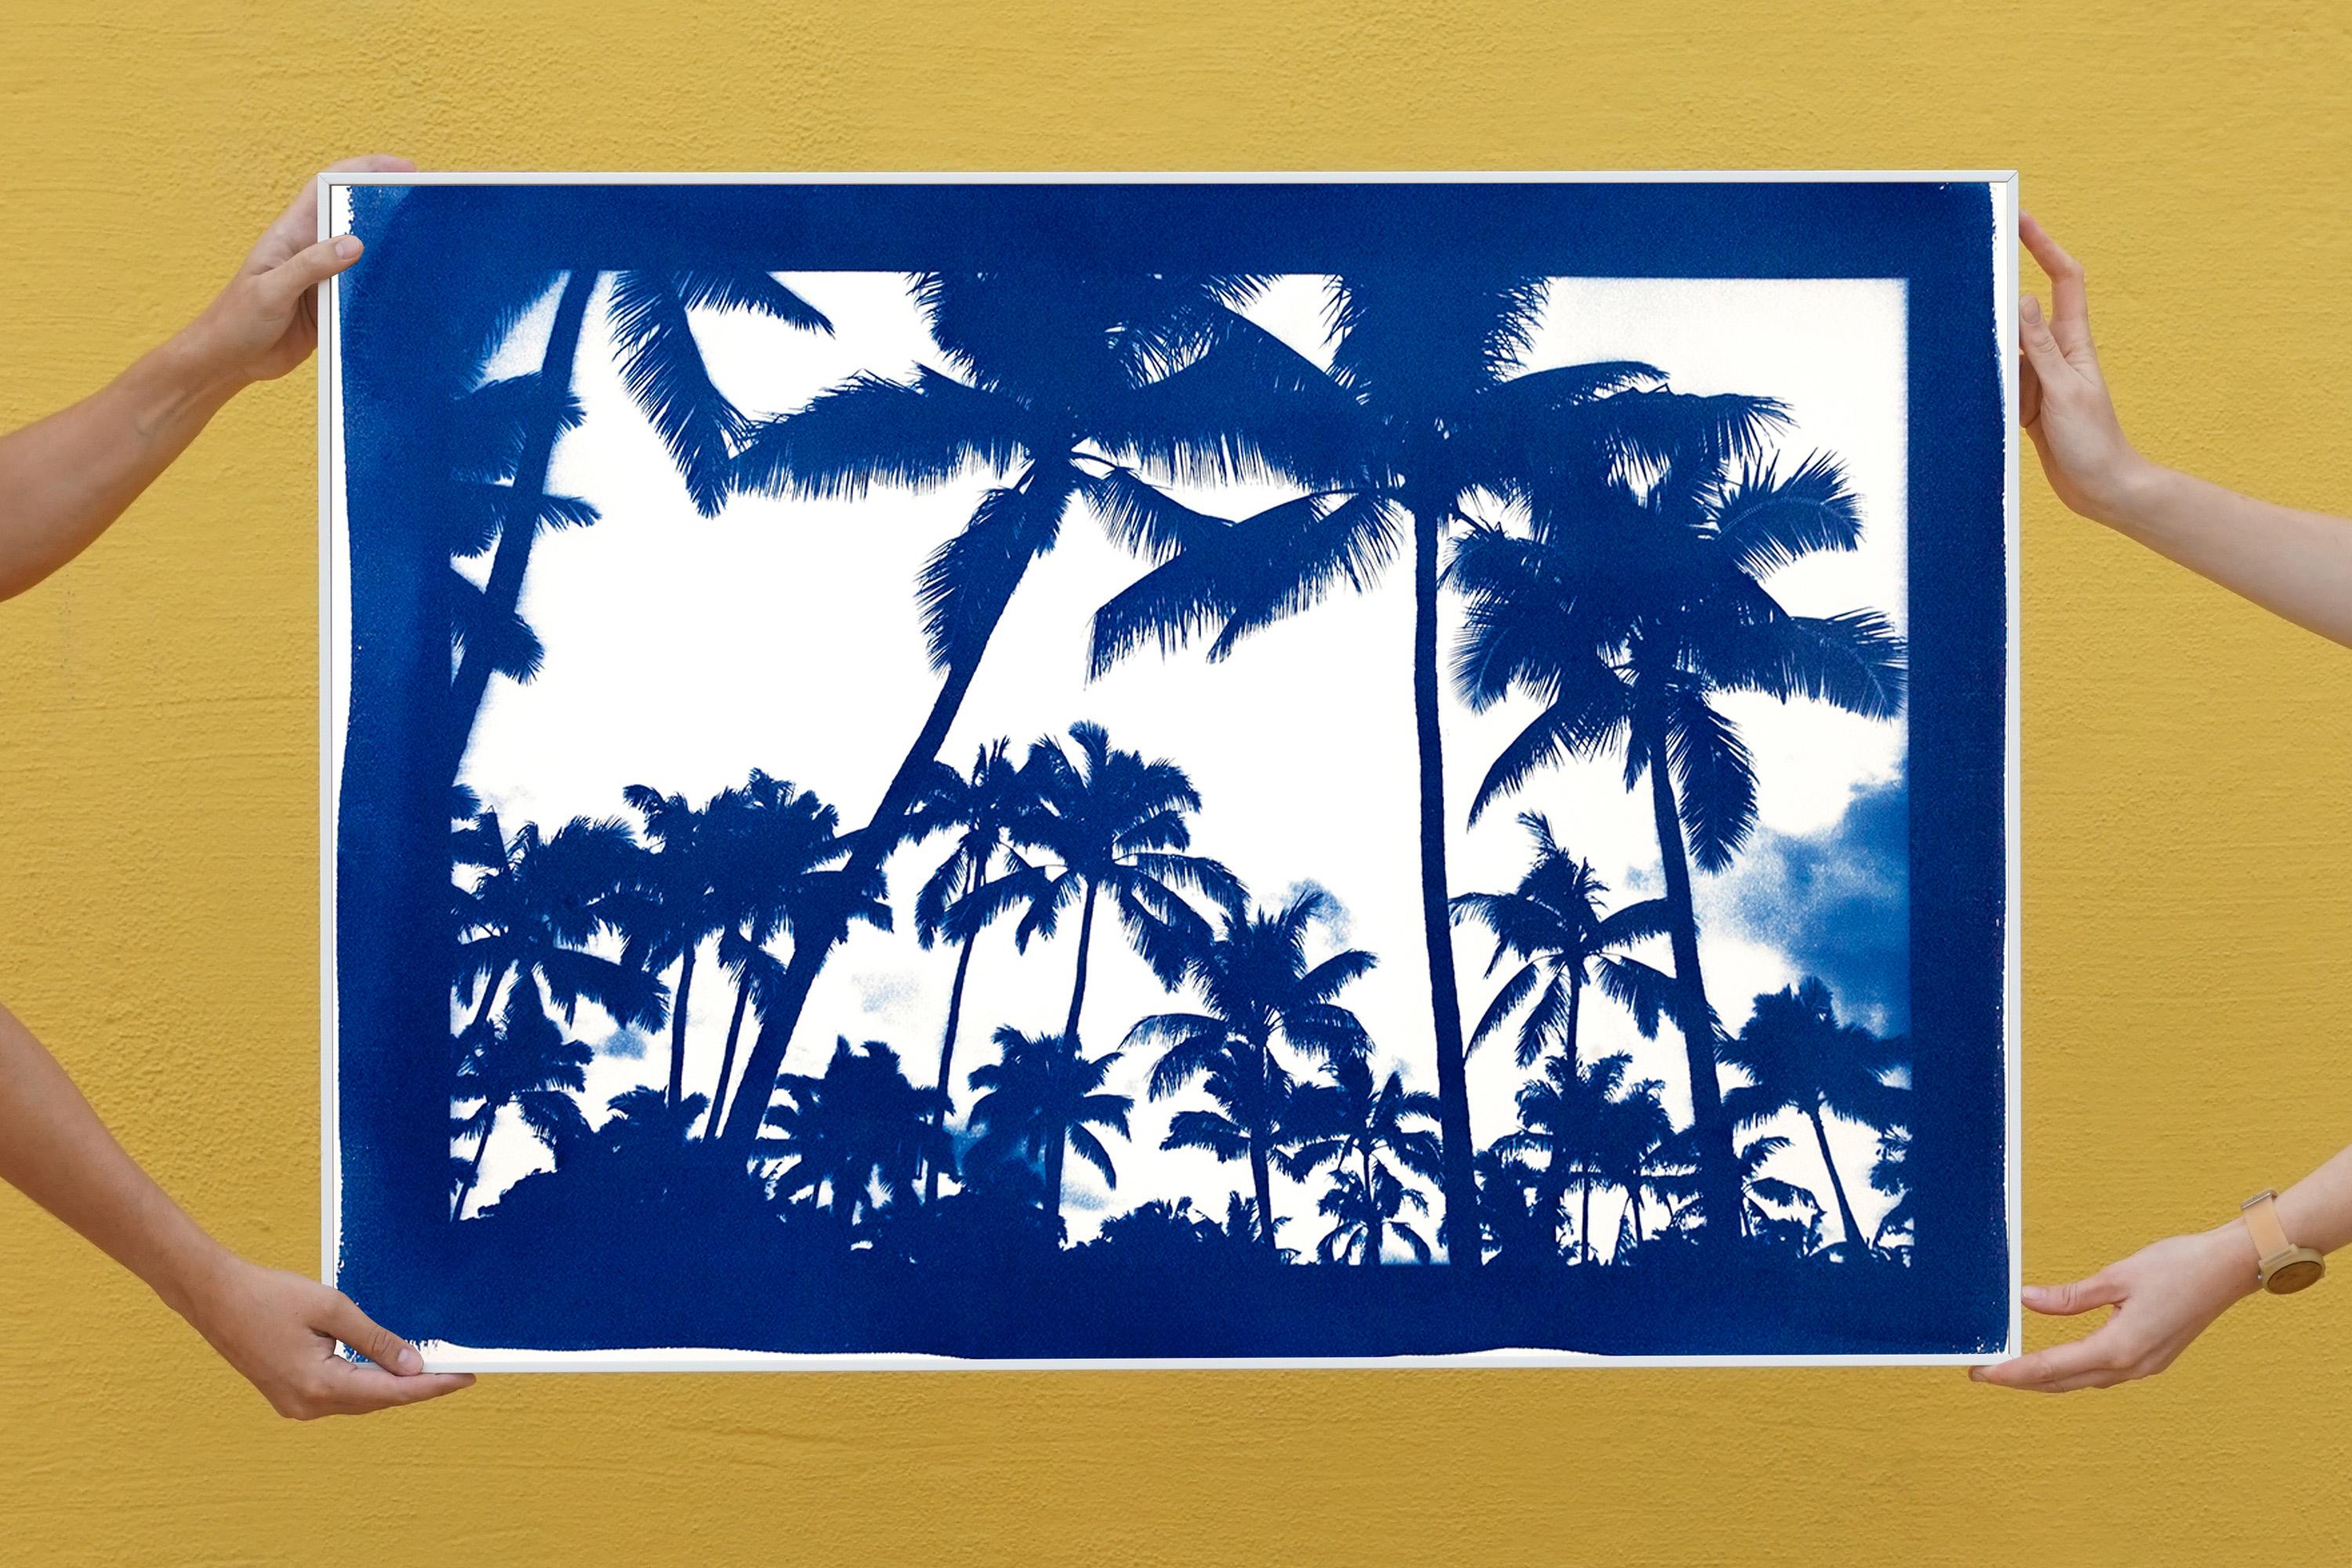 Acapulco Palm Sunset, Blue Border, Cyanotype on Watercolor Paper, 100x70cm 1